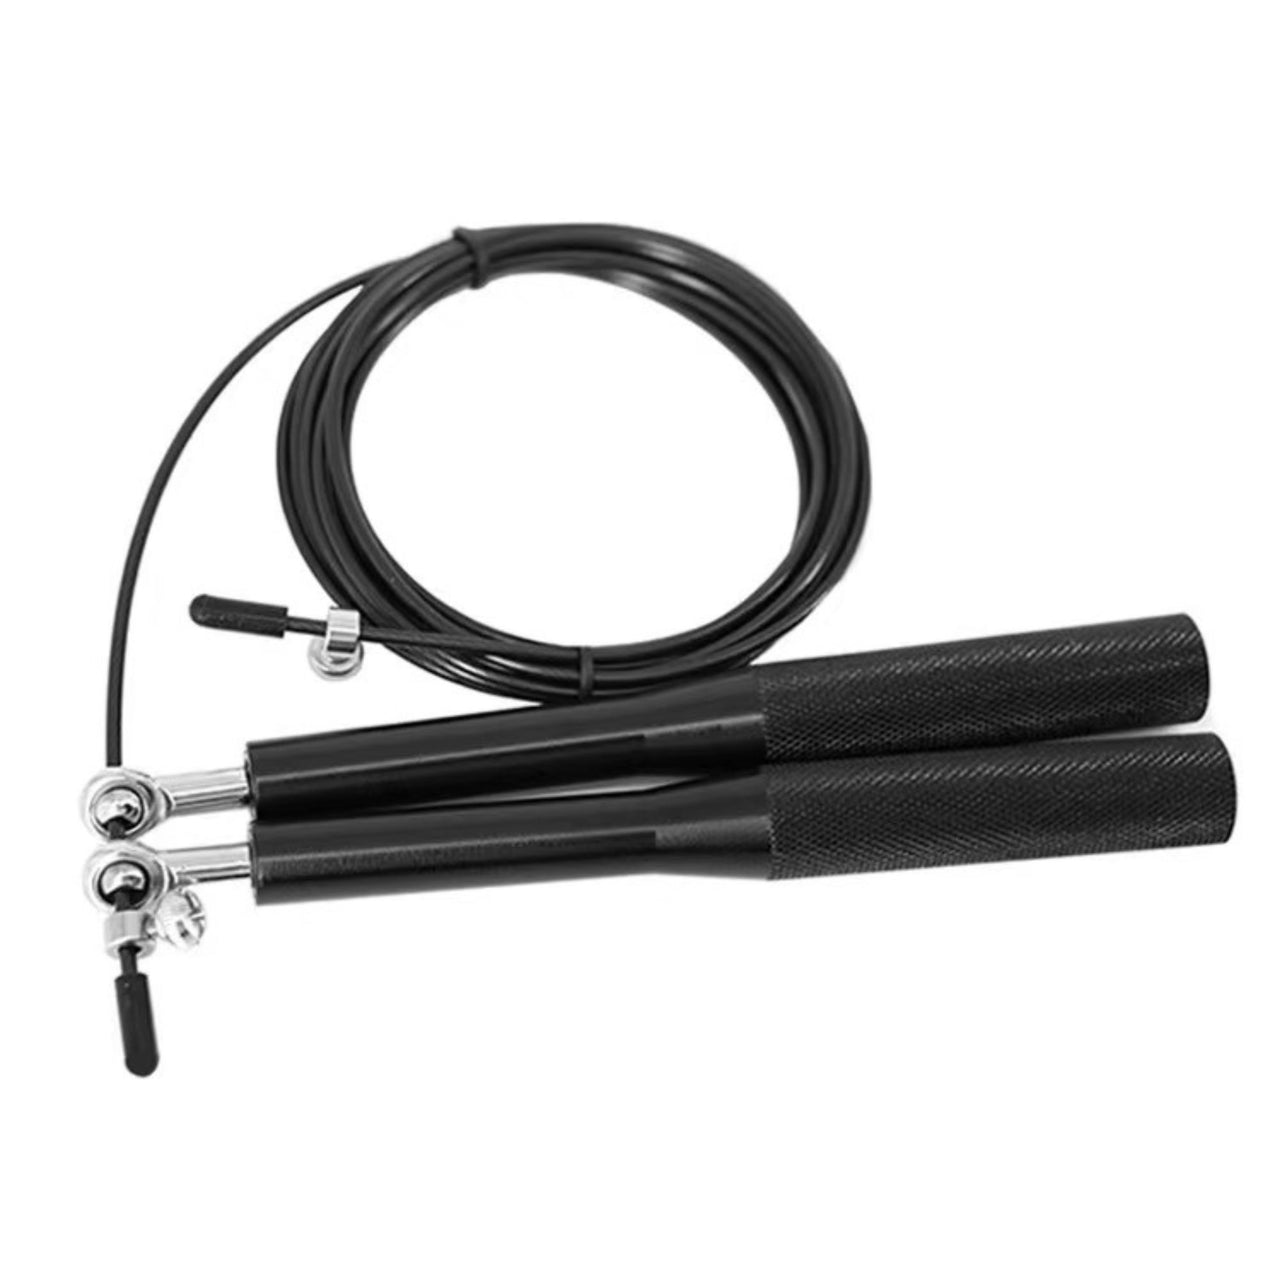 VULCAN Competition Aluminium Skipping Rope | IN STOCK | FREE SHIPPING